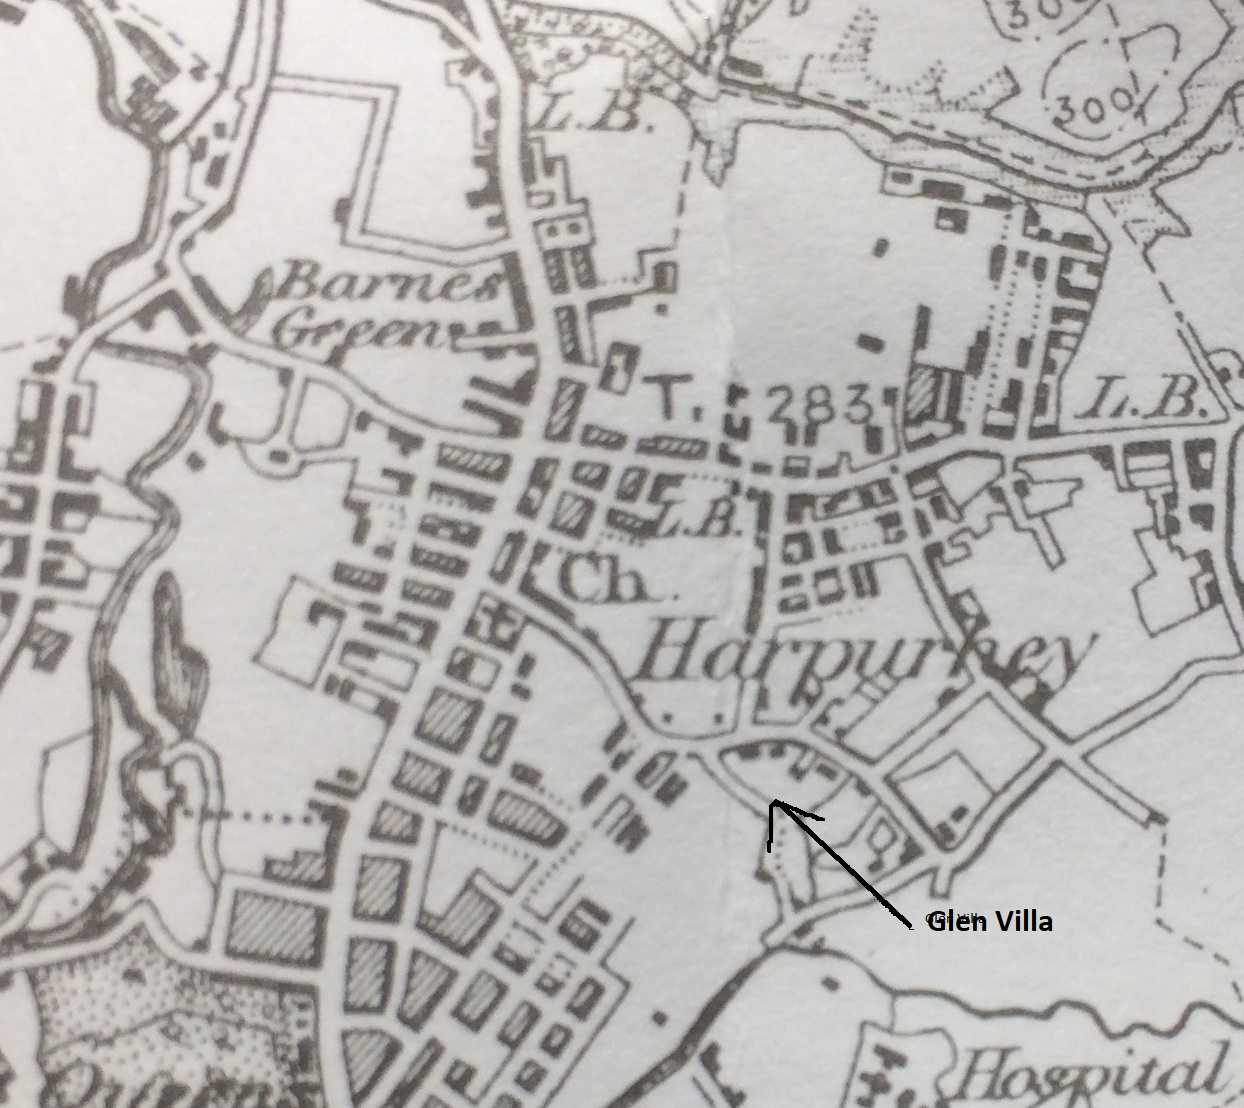 Harpurhey in 1896 from 1-inch OS map  - Alan Godrey sheet 85 and National Library of Scotland